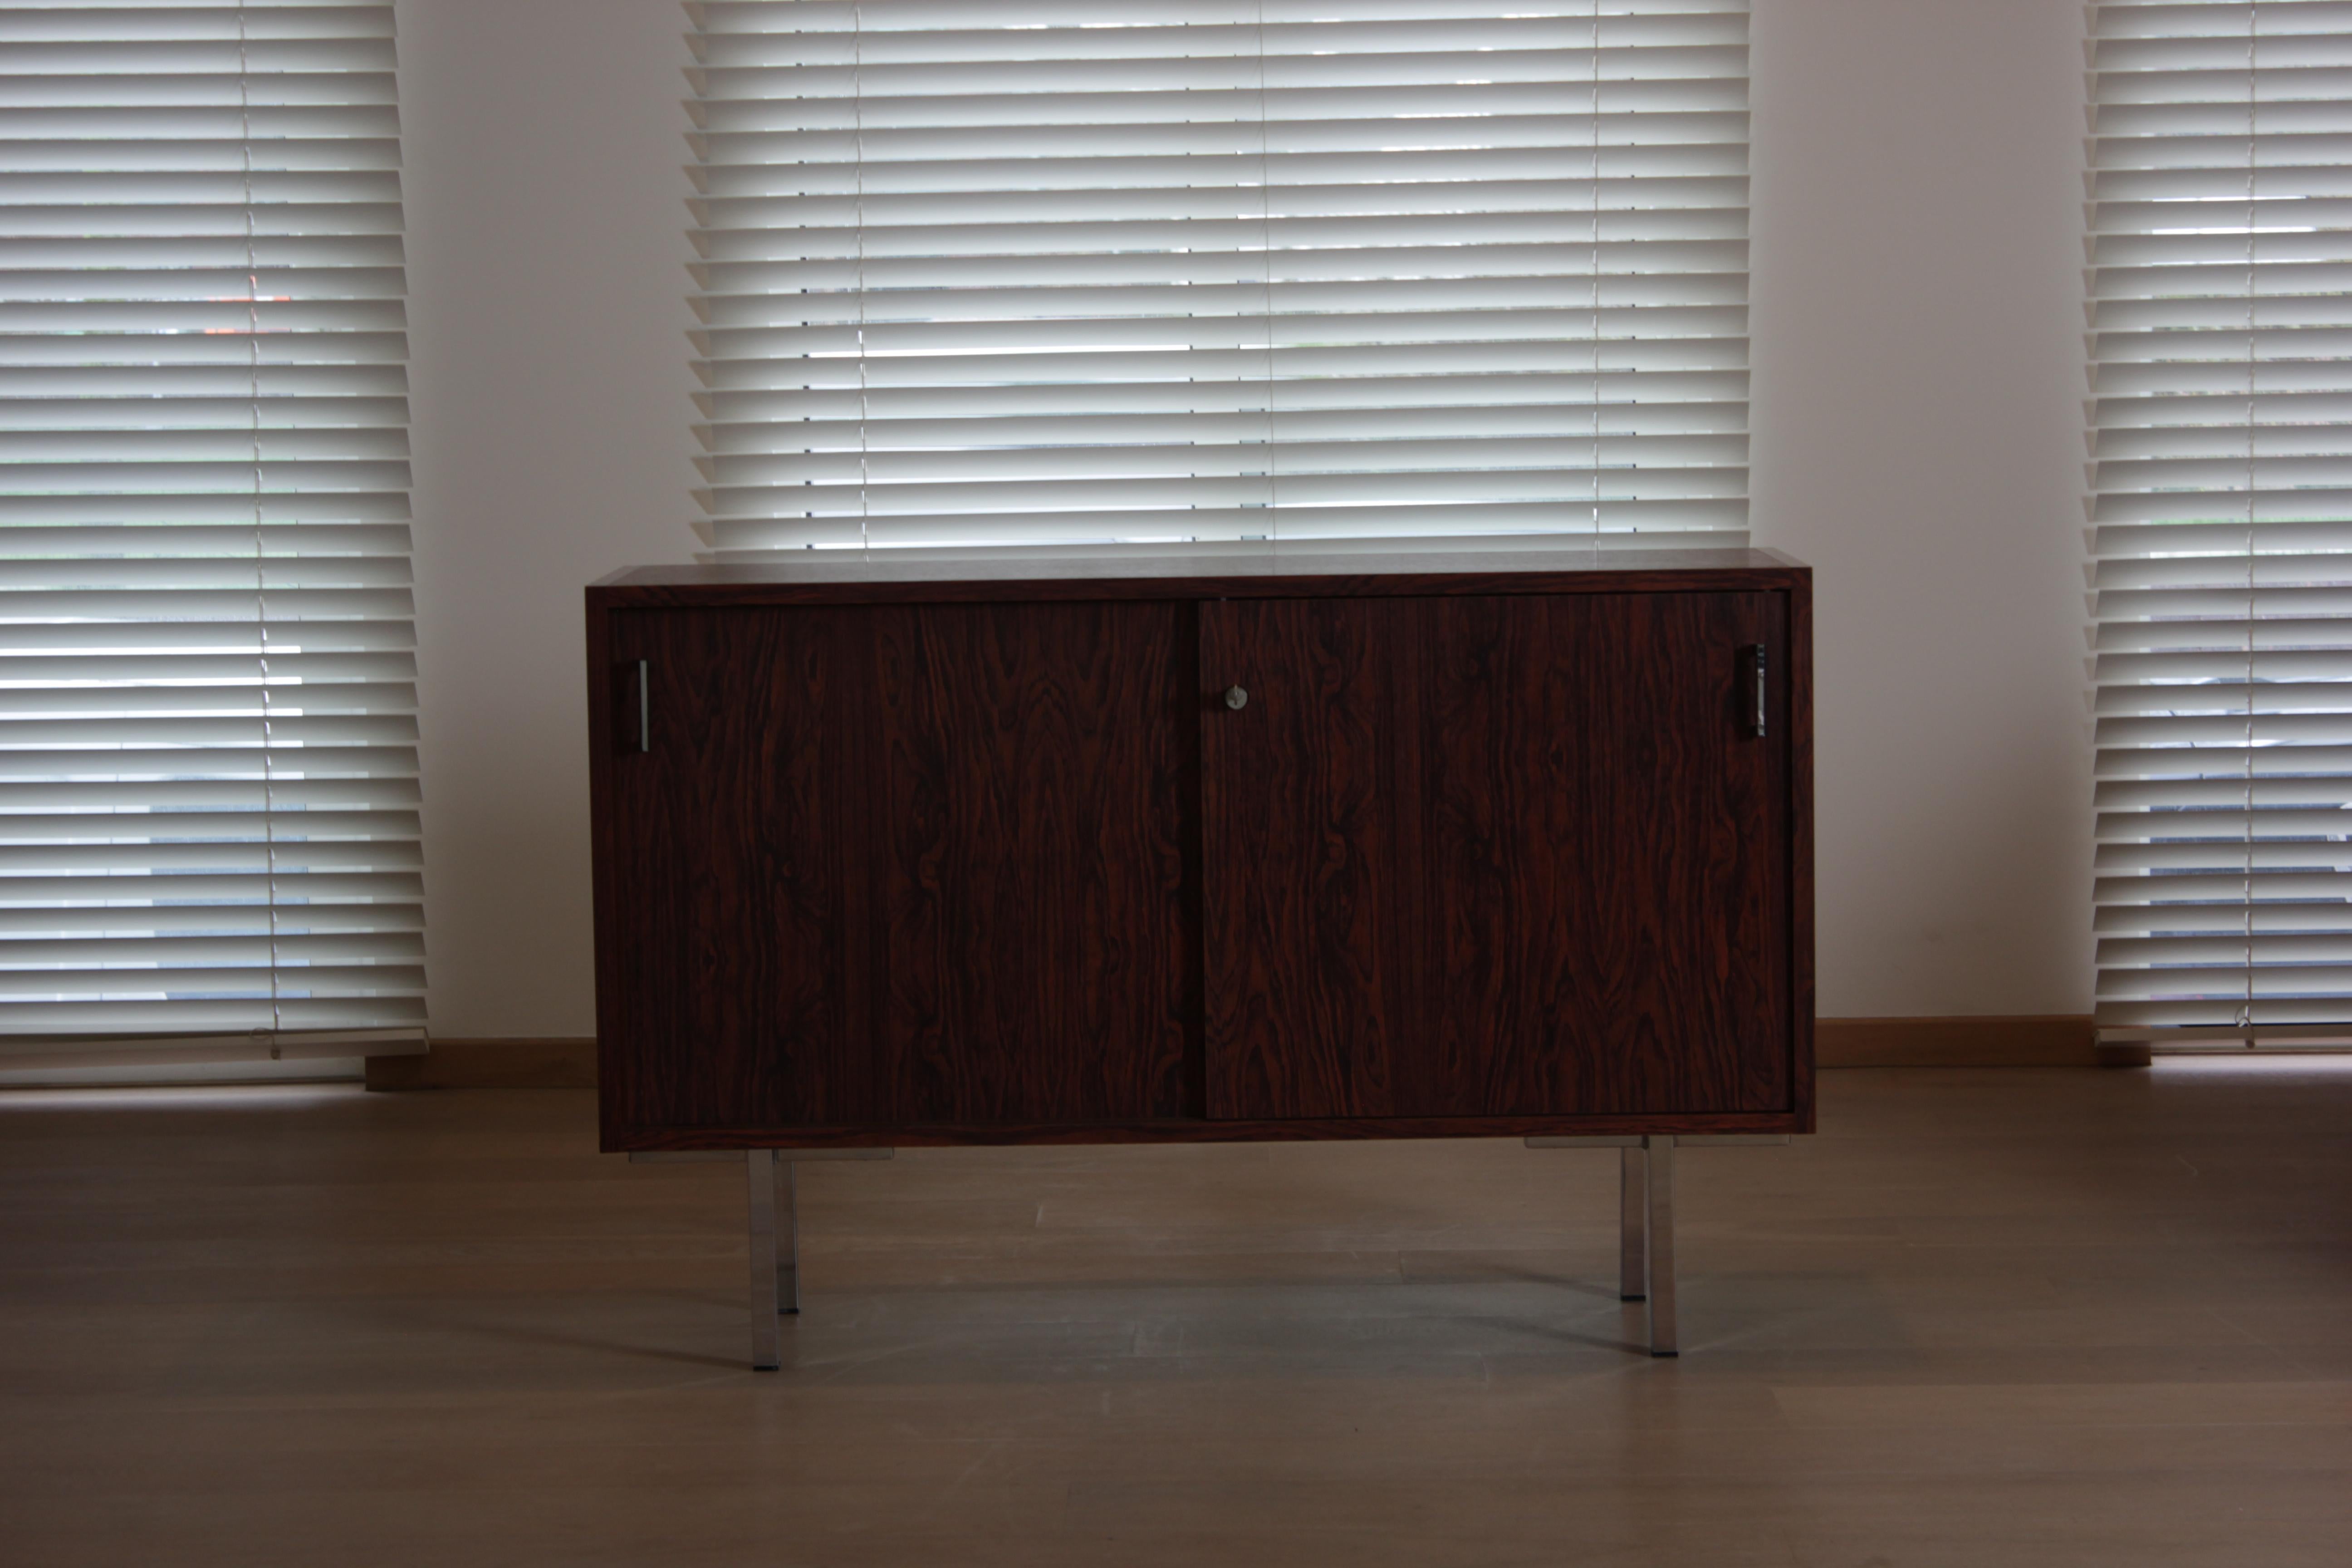 1960s

Belgium

Rosewood

79cm high, 120.5cm wide, 37cm deep

Alfred Hendrickx (b.1931, Mechelen) emerged as a prominent designer during the dynamic period of the 1950s and 1960s. Celebrated for his influential contributions to the world of design,